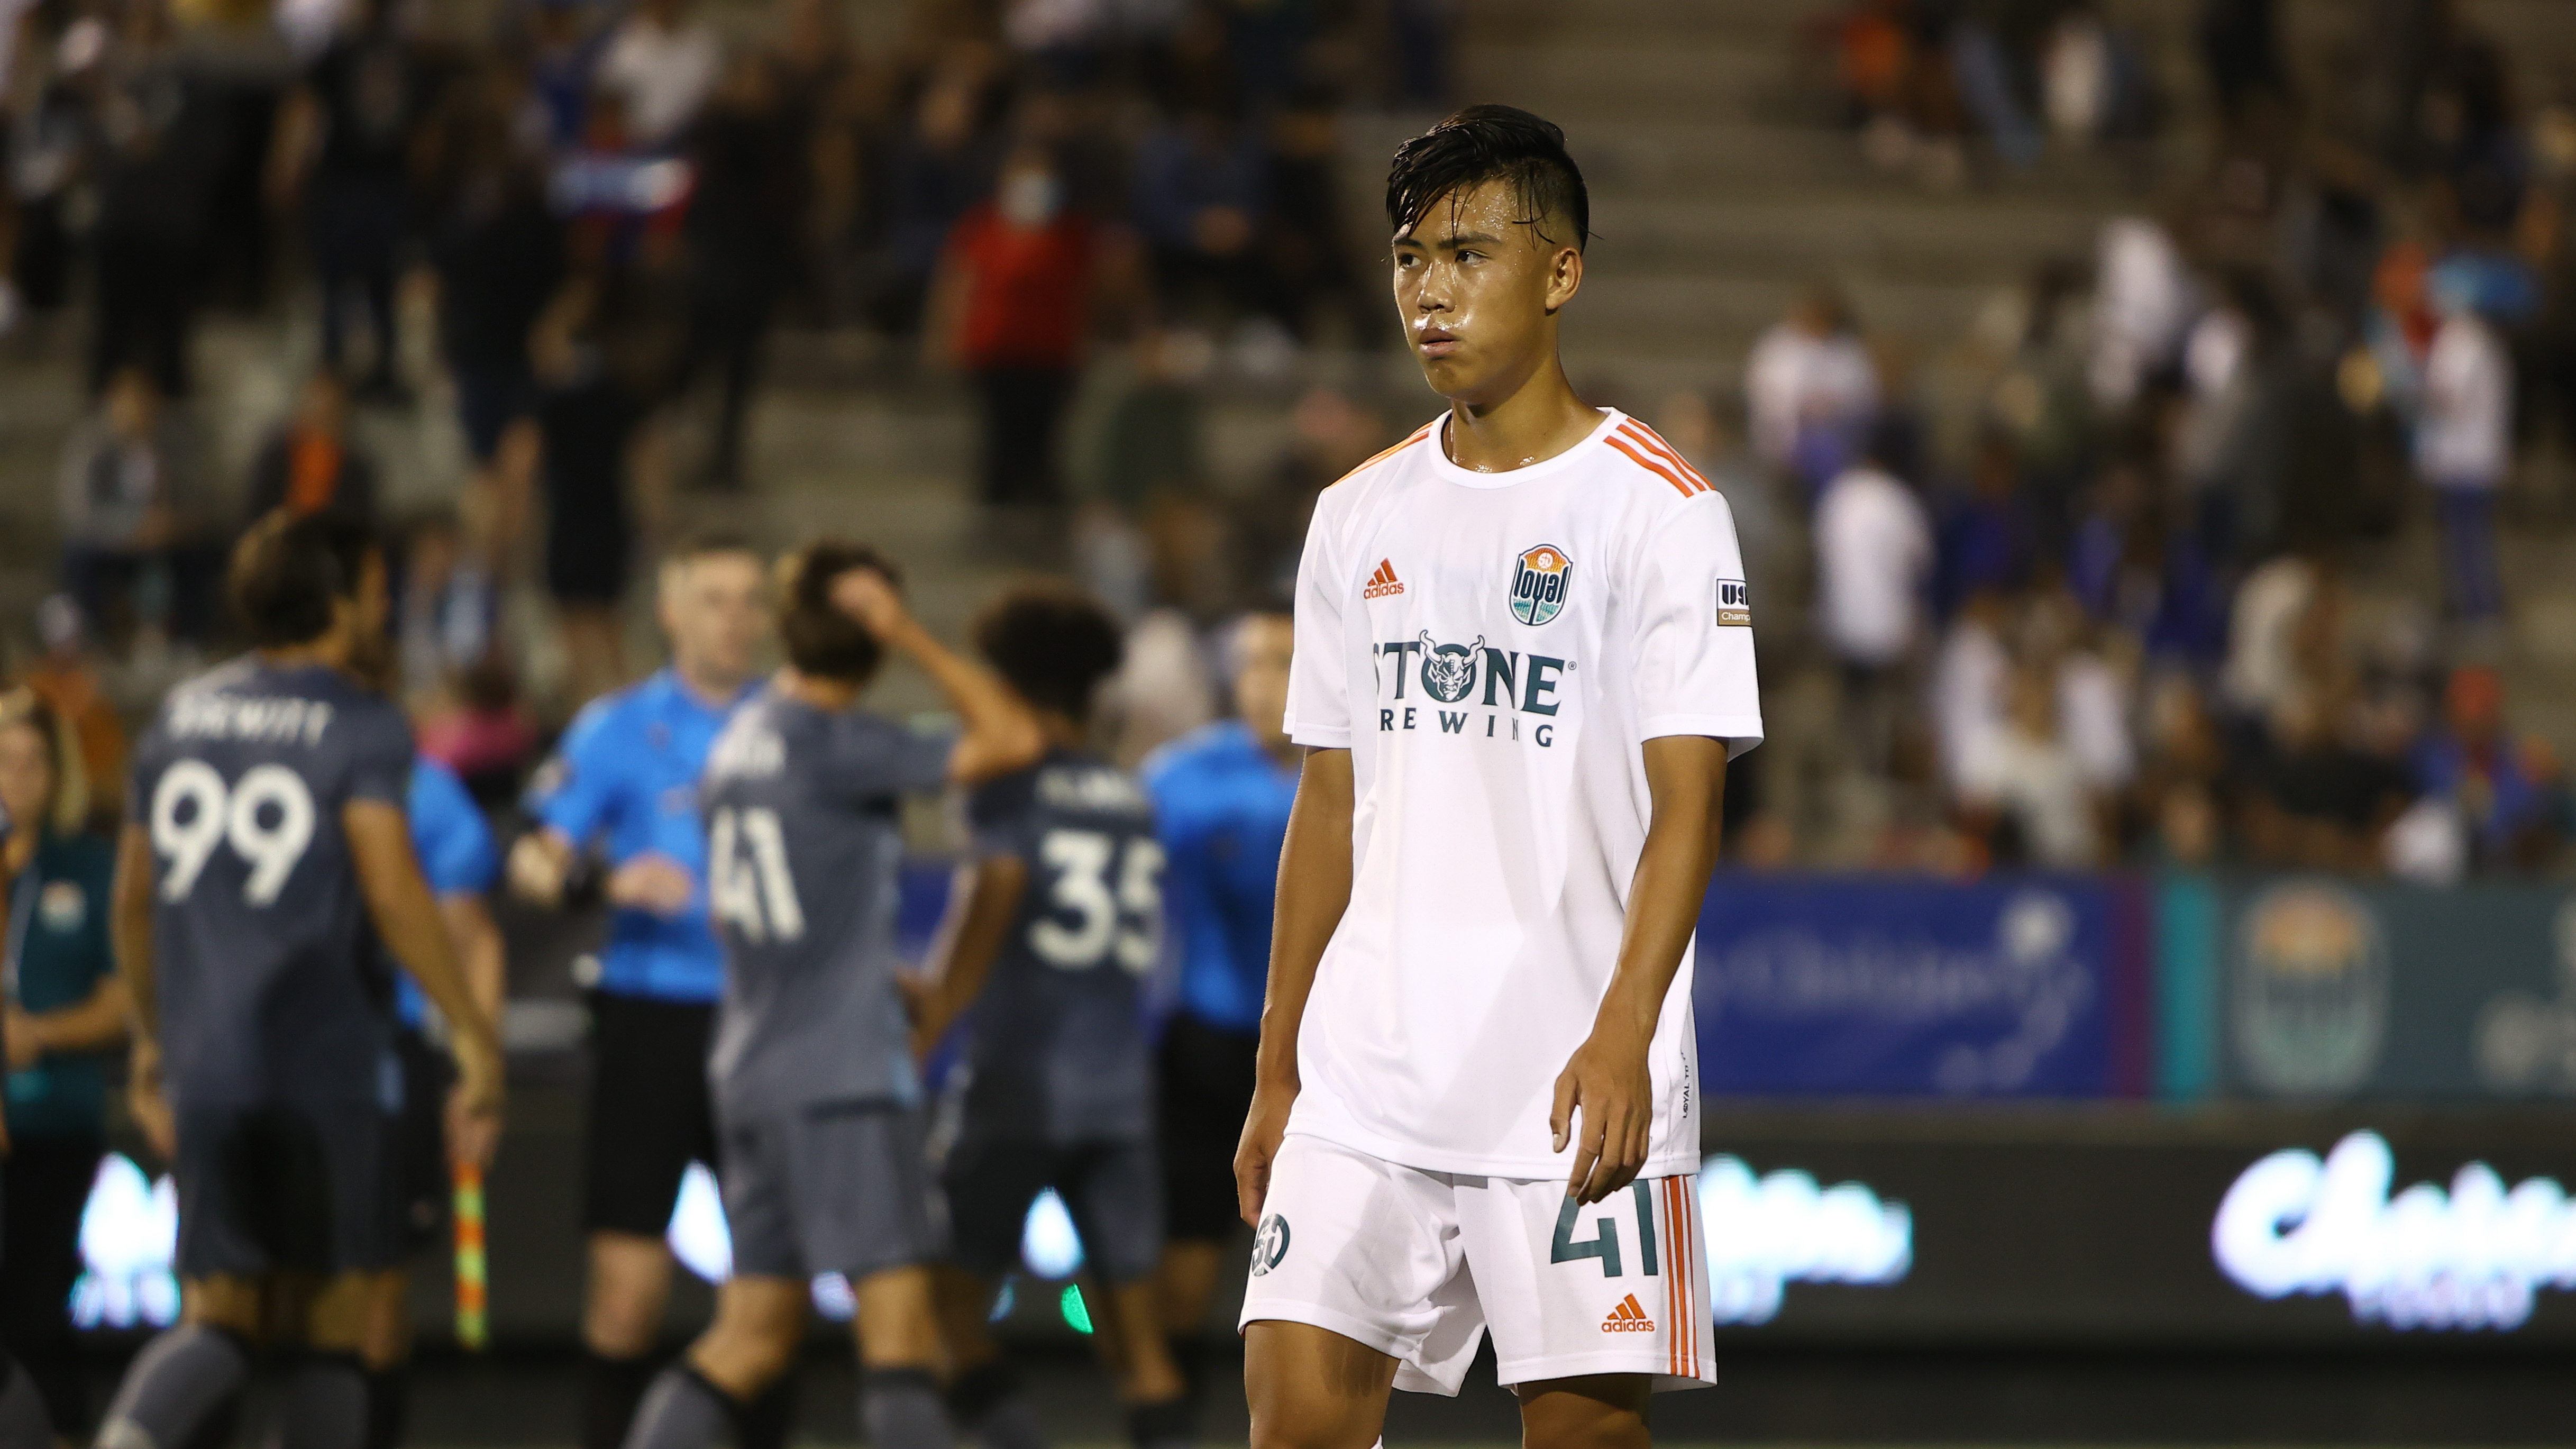 16-year-old Ian Mai plays in his first ever pro match against the Tacoma Defiance. 